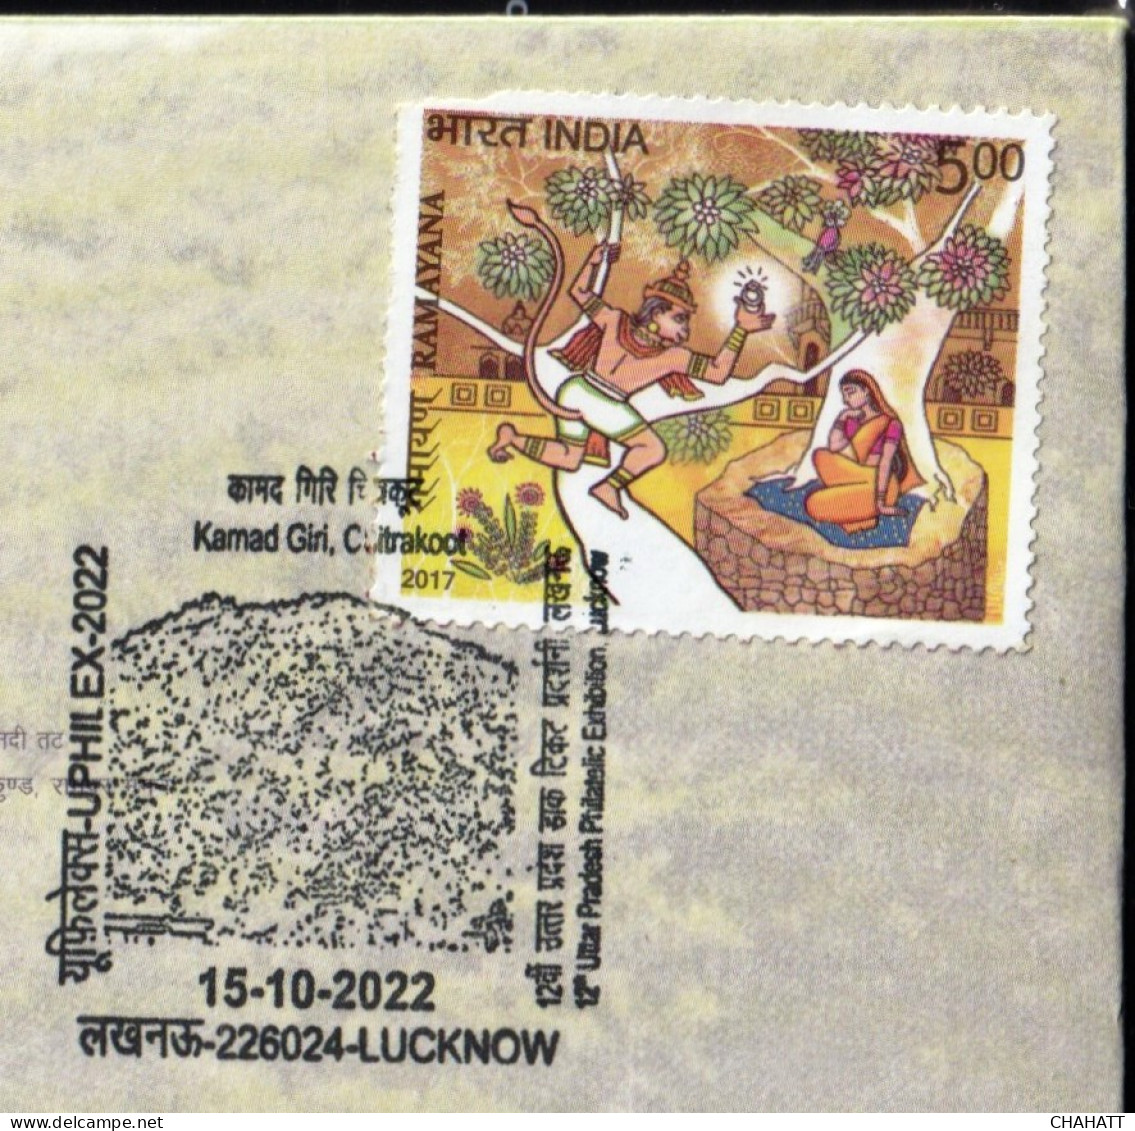 HINDUISM - RAMAYAN- KAMAD GIRI, FOREST HILLS OF CHITRAKOOT-PICTORIAL CANCELLATION - SPECIAL COVER - INDIA -2022- BX4-23 - Hindoeïsme